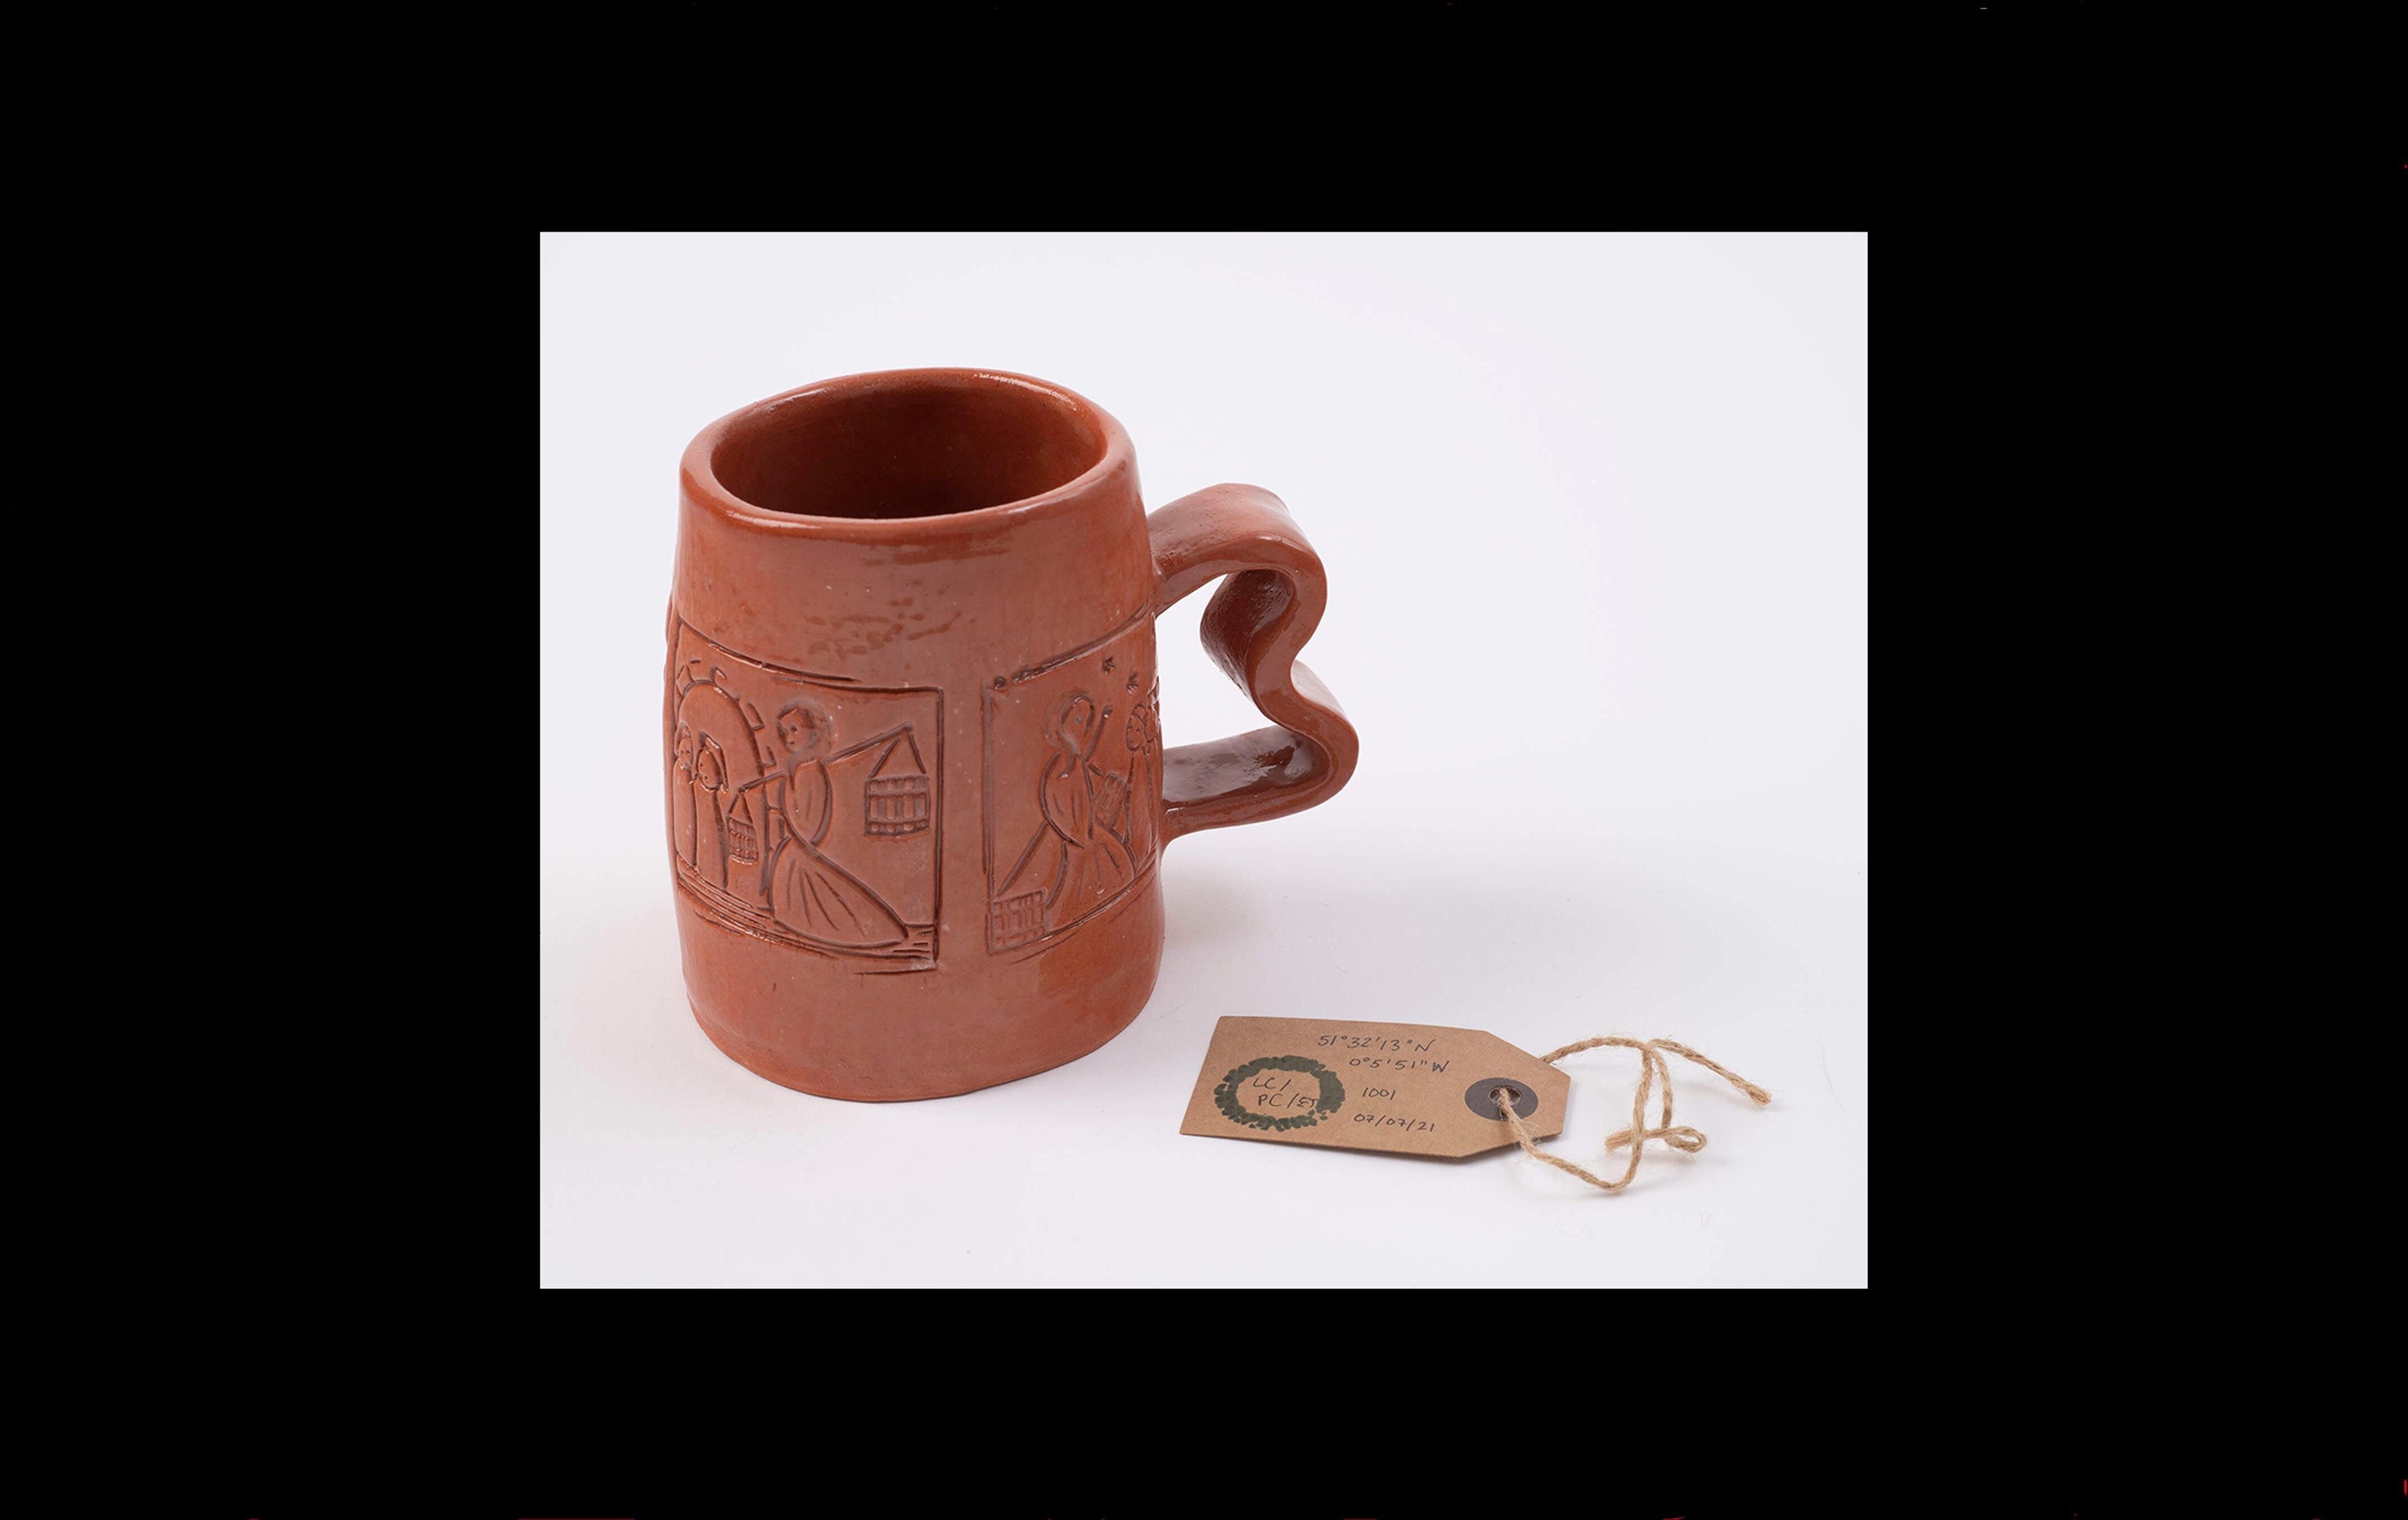 Photograph with a red clay mug with a brown museum label beside it. The mug is embossed using the wooden stamps displayed earlier in the sequence. 